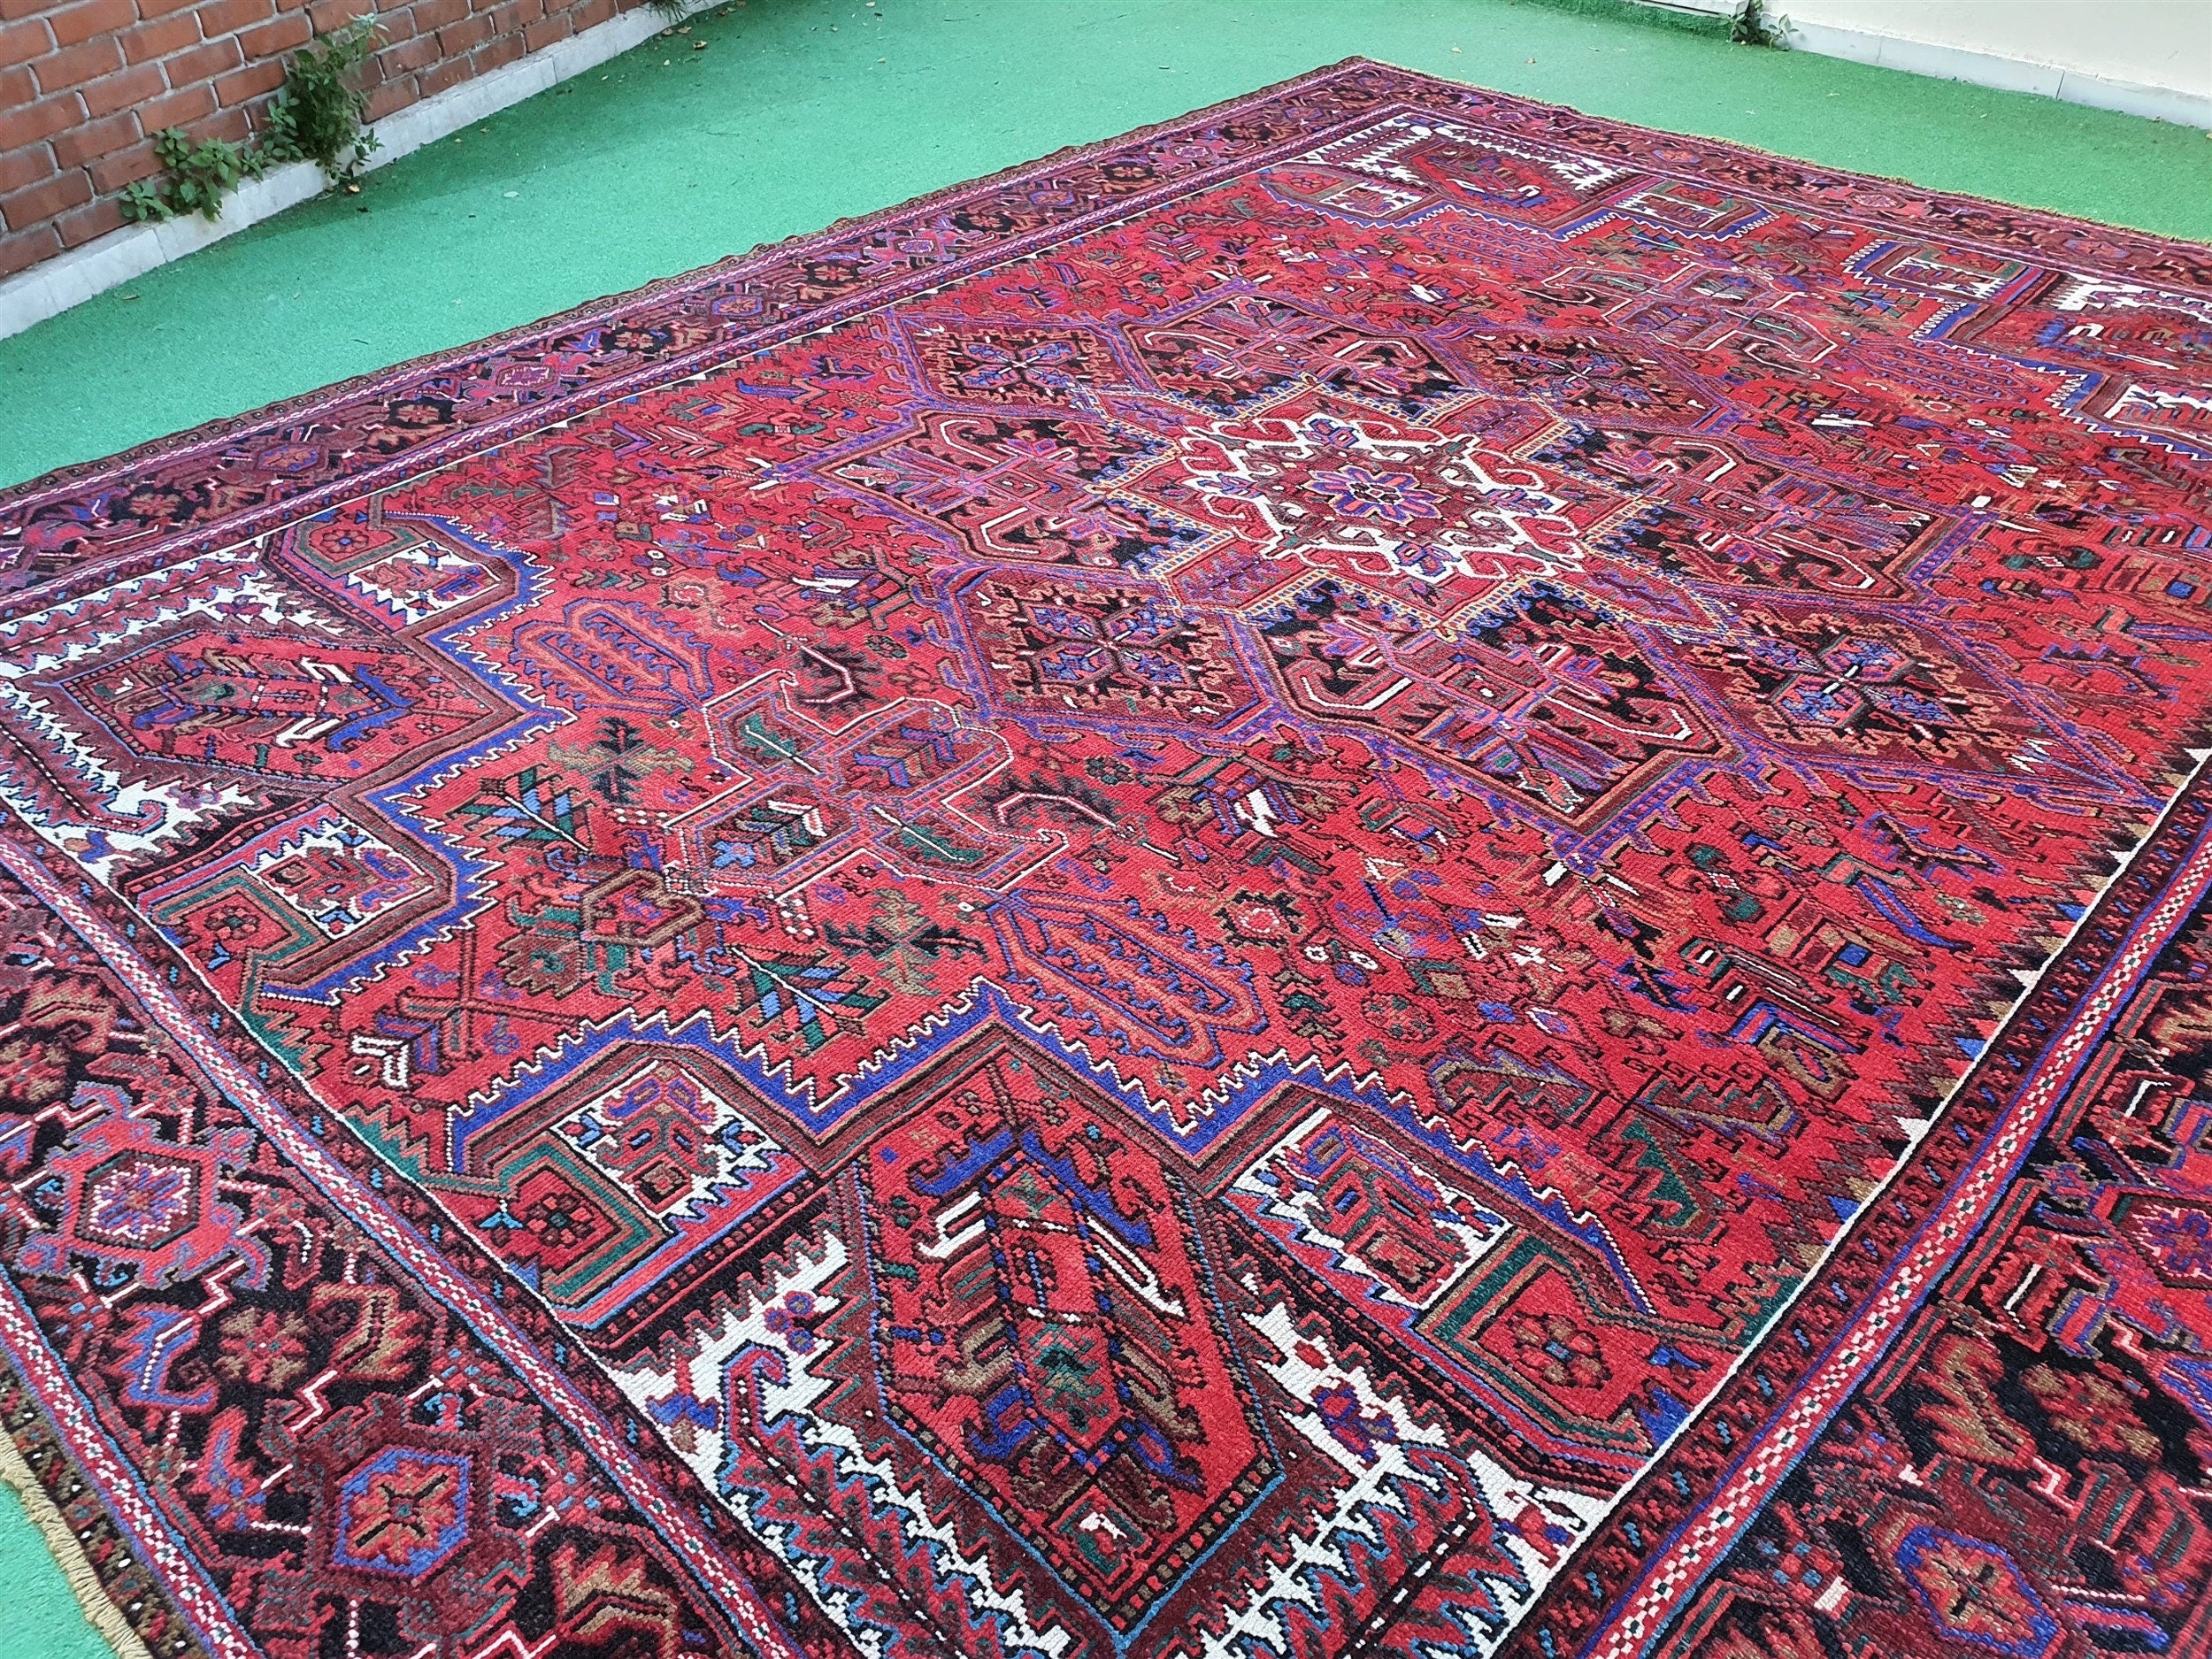 Large Red Persian Rug, Oversized Blue Red Handmade Oriental Carpet 12'5''x 9'9''